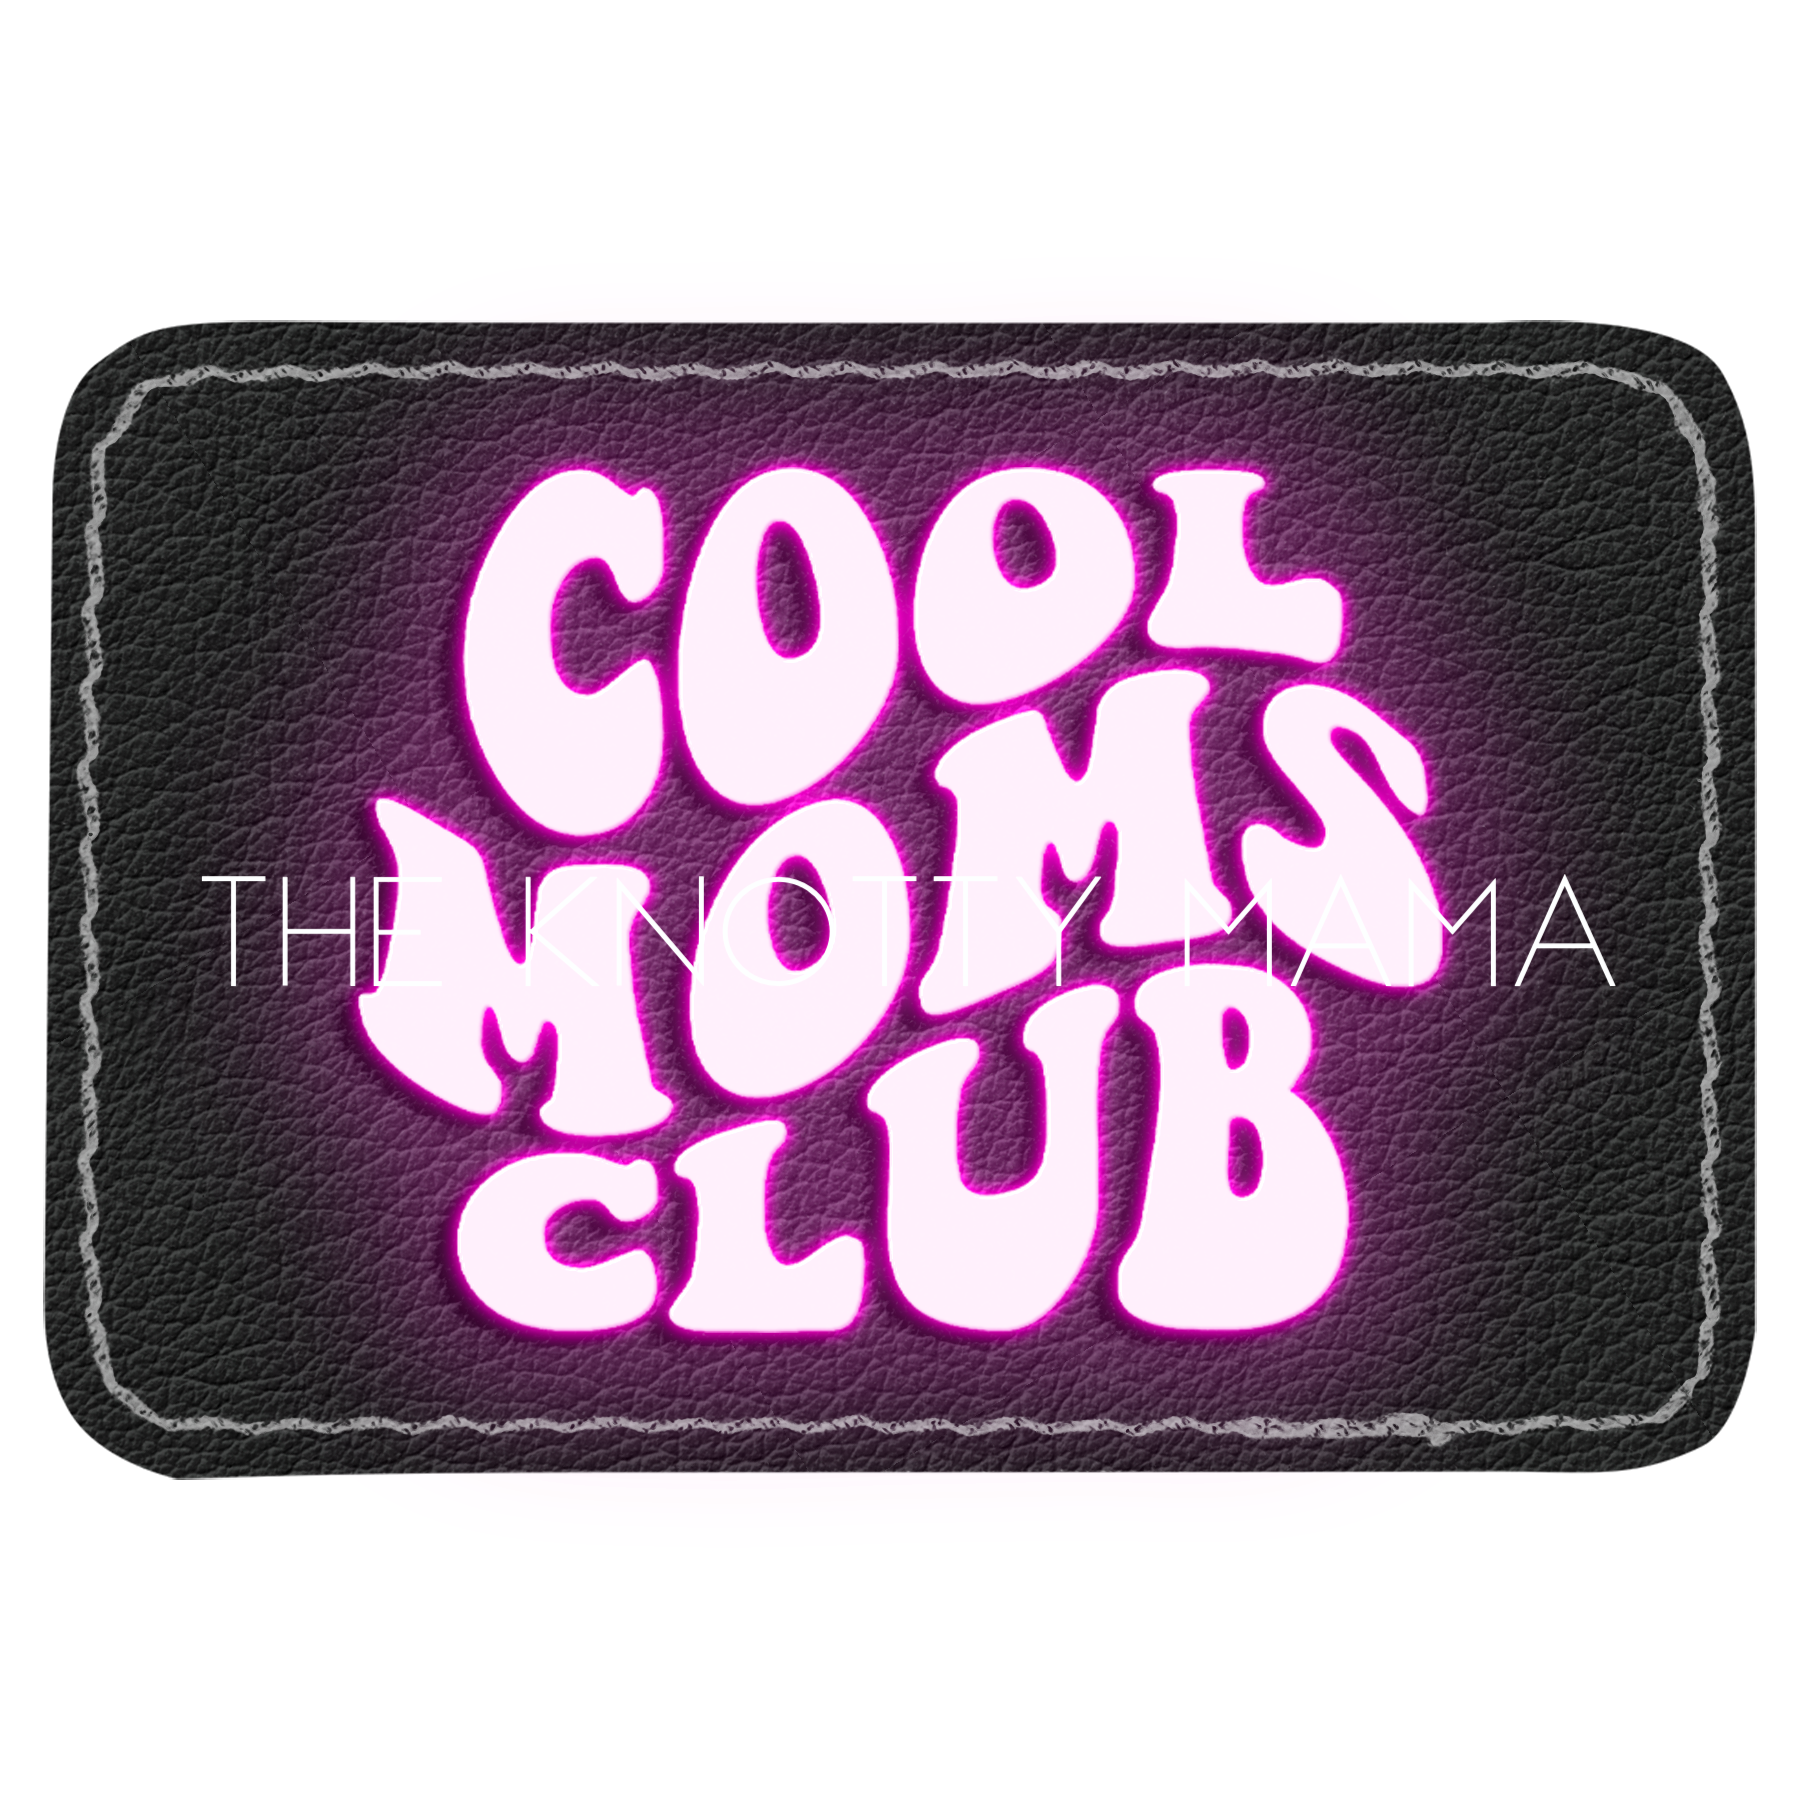 Neon Cool Moms Club Patch